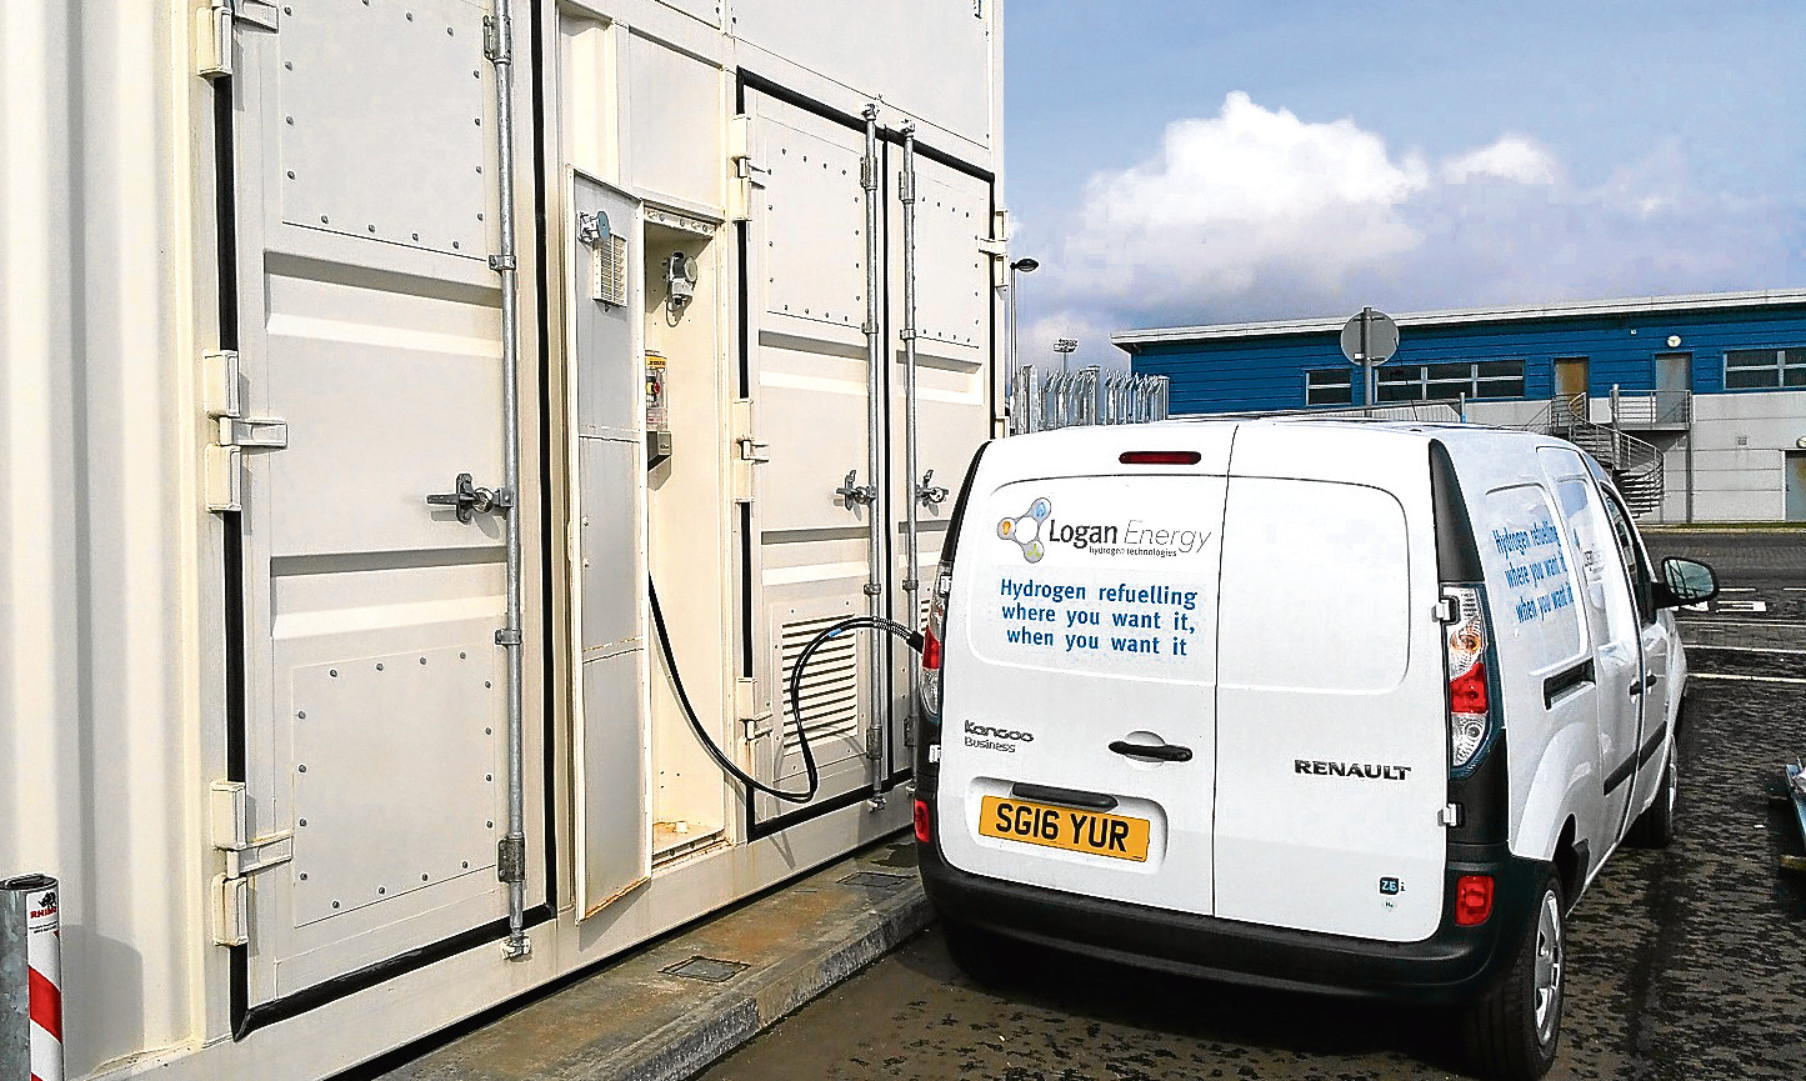 A Logan Energy van refuelling at the hydrogen station at Methil